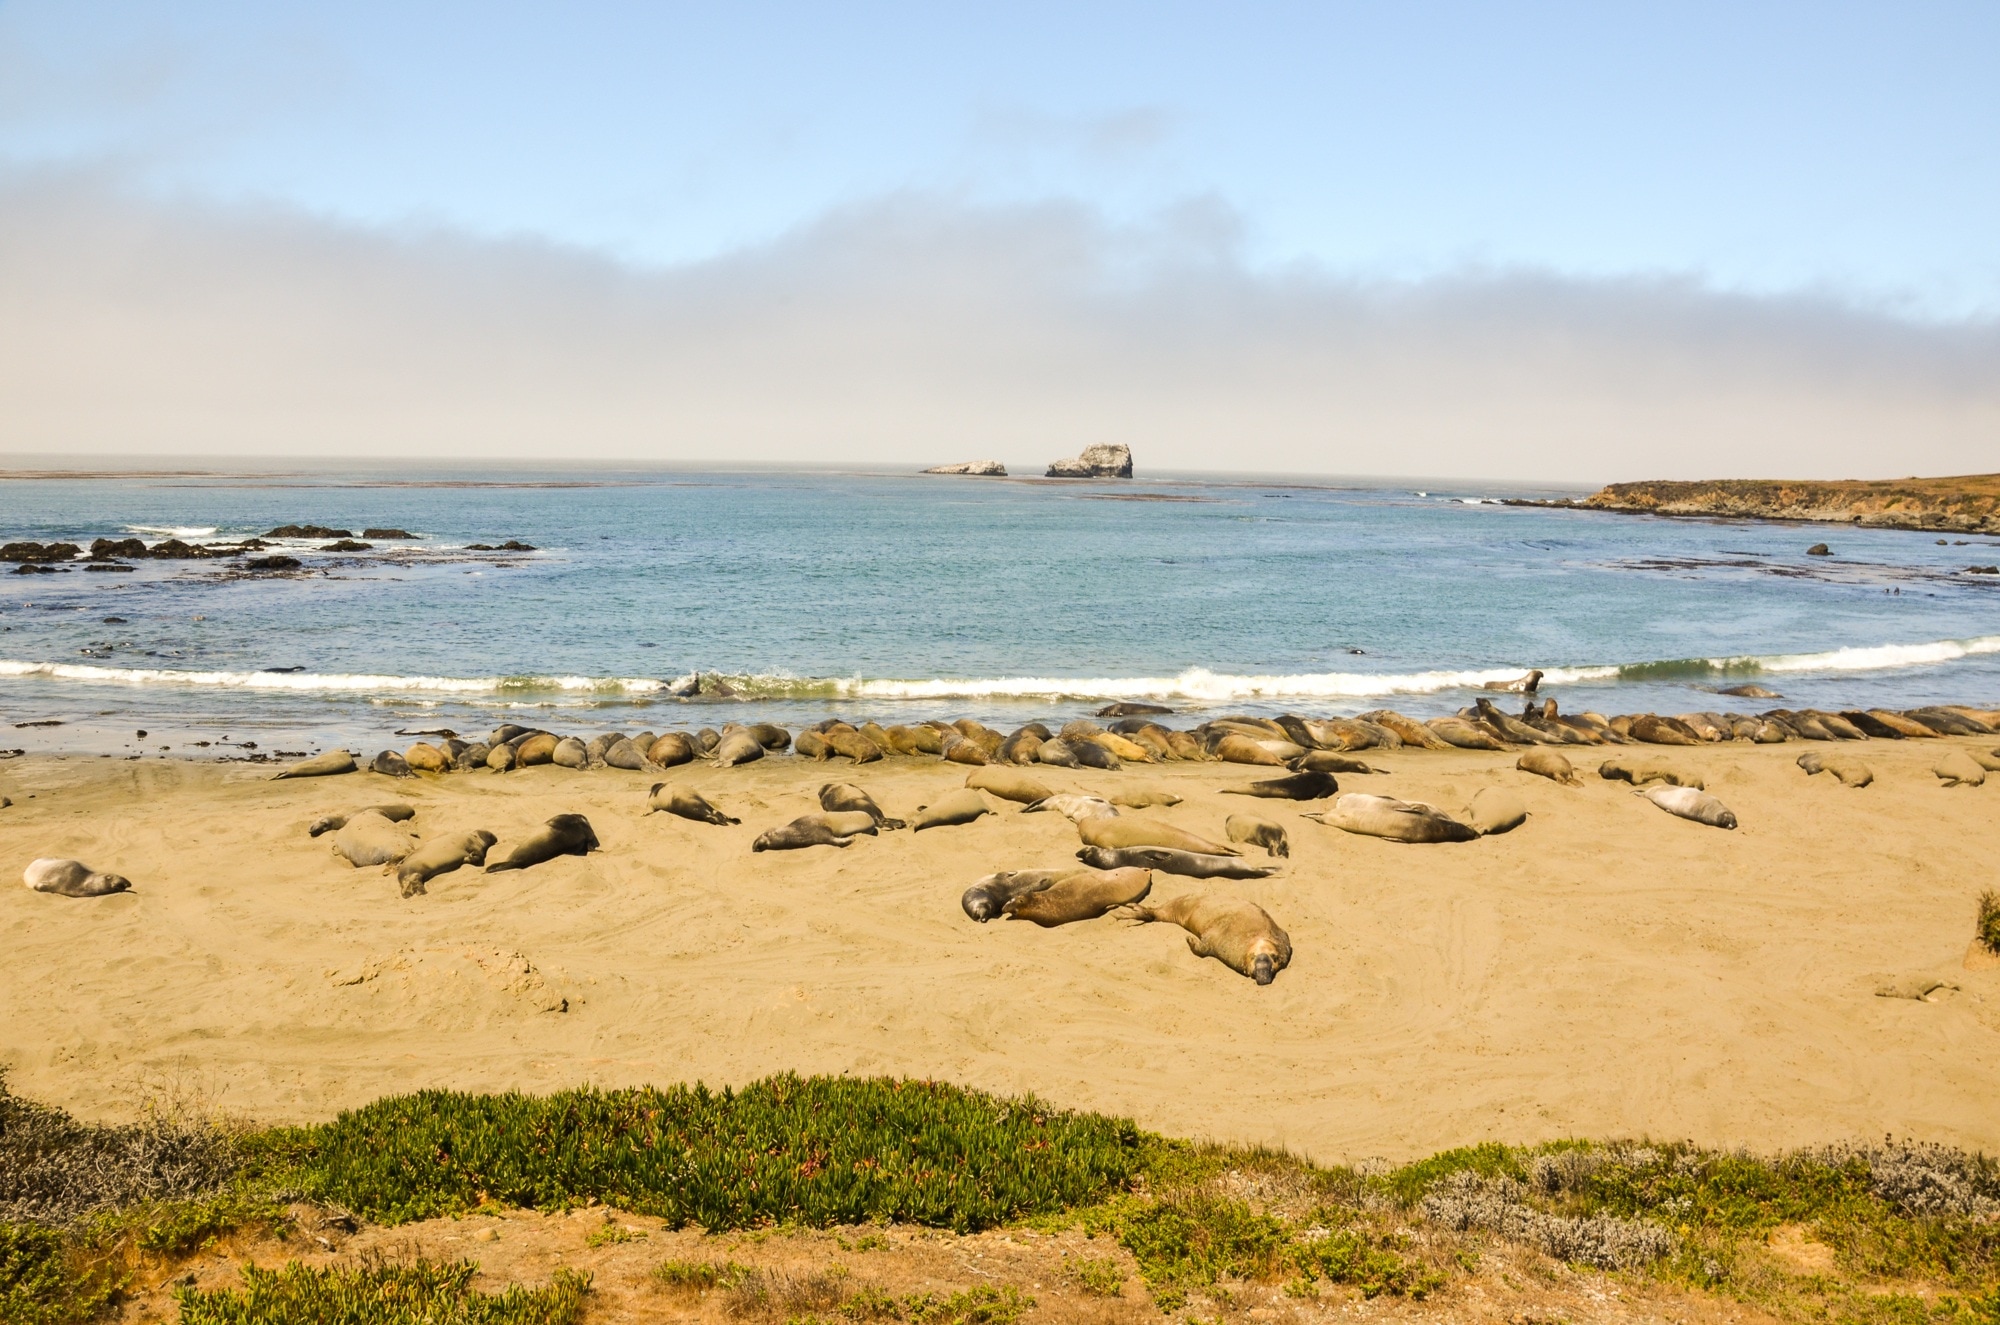 group of seals